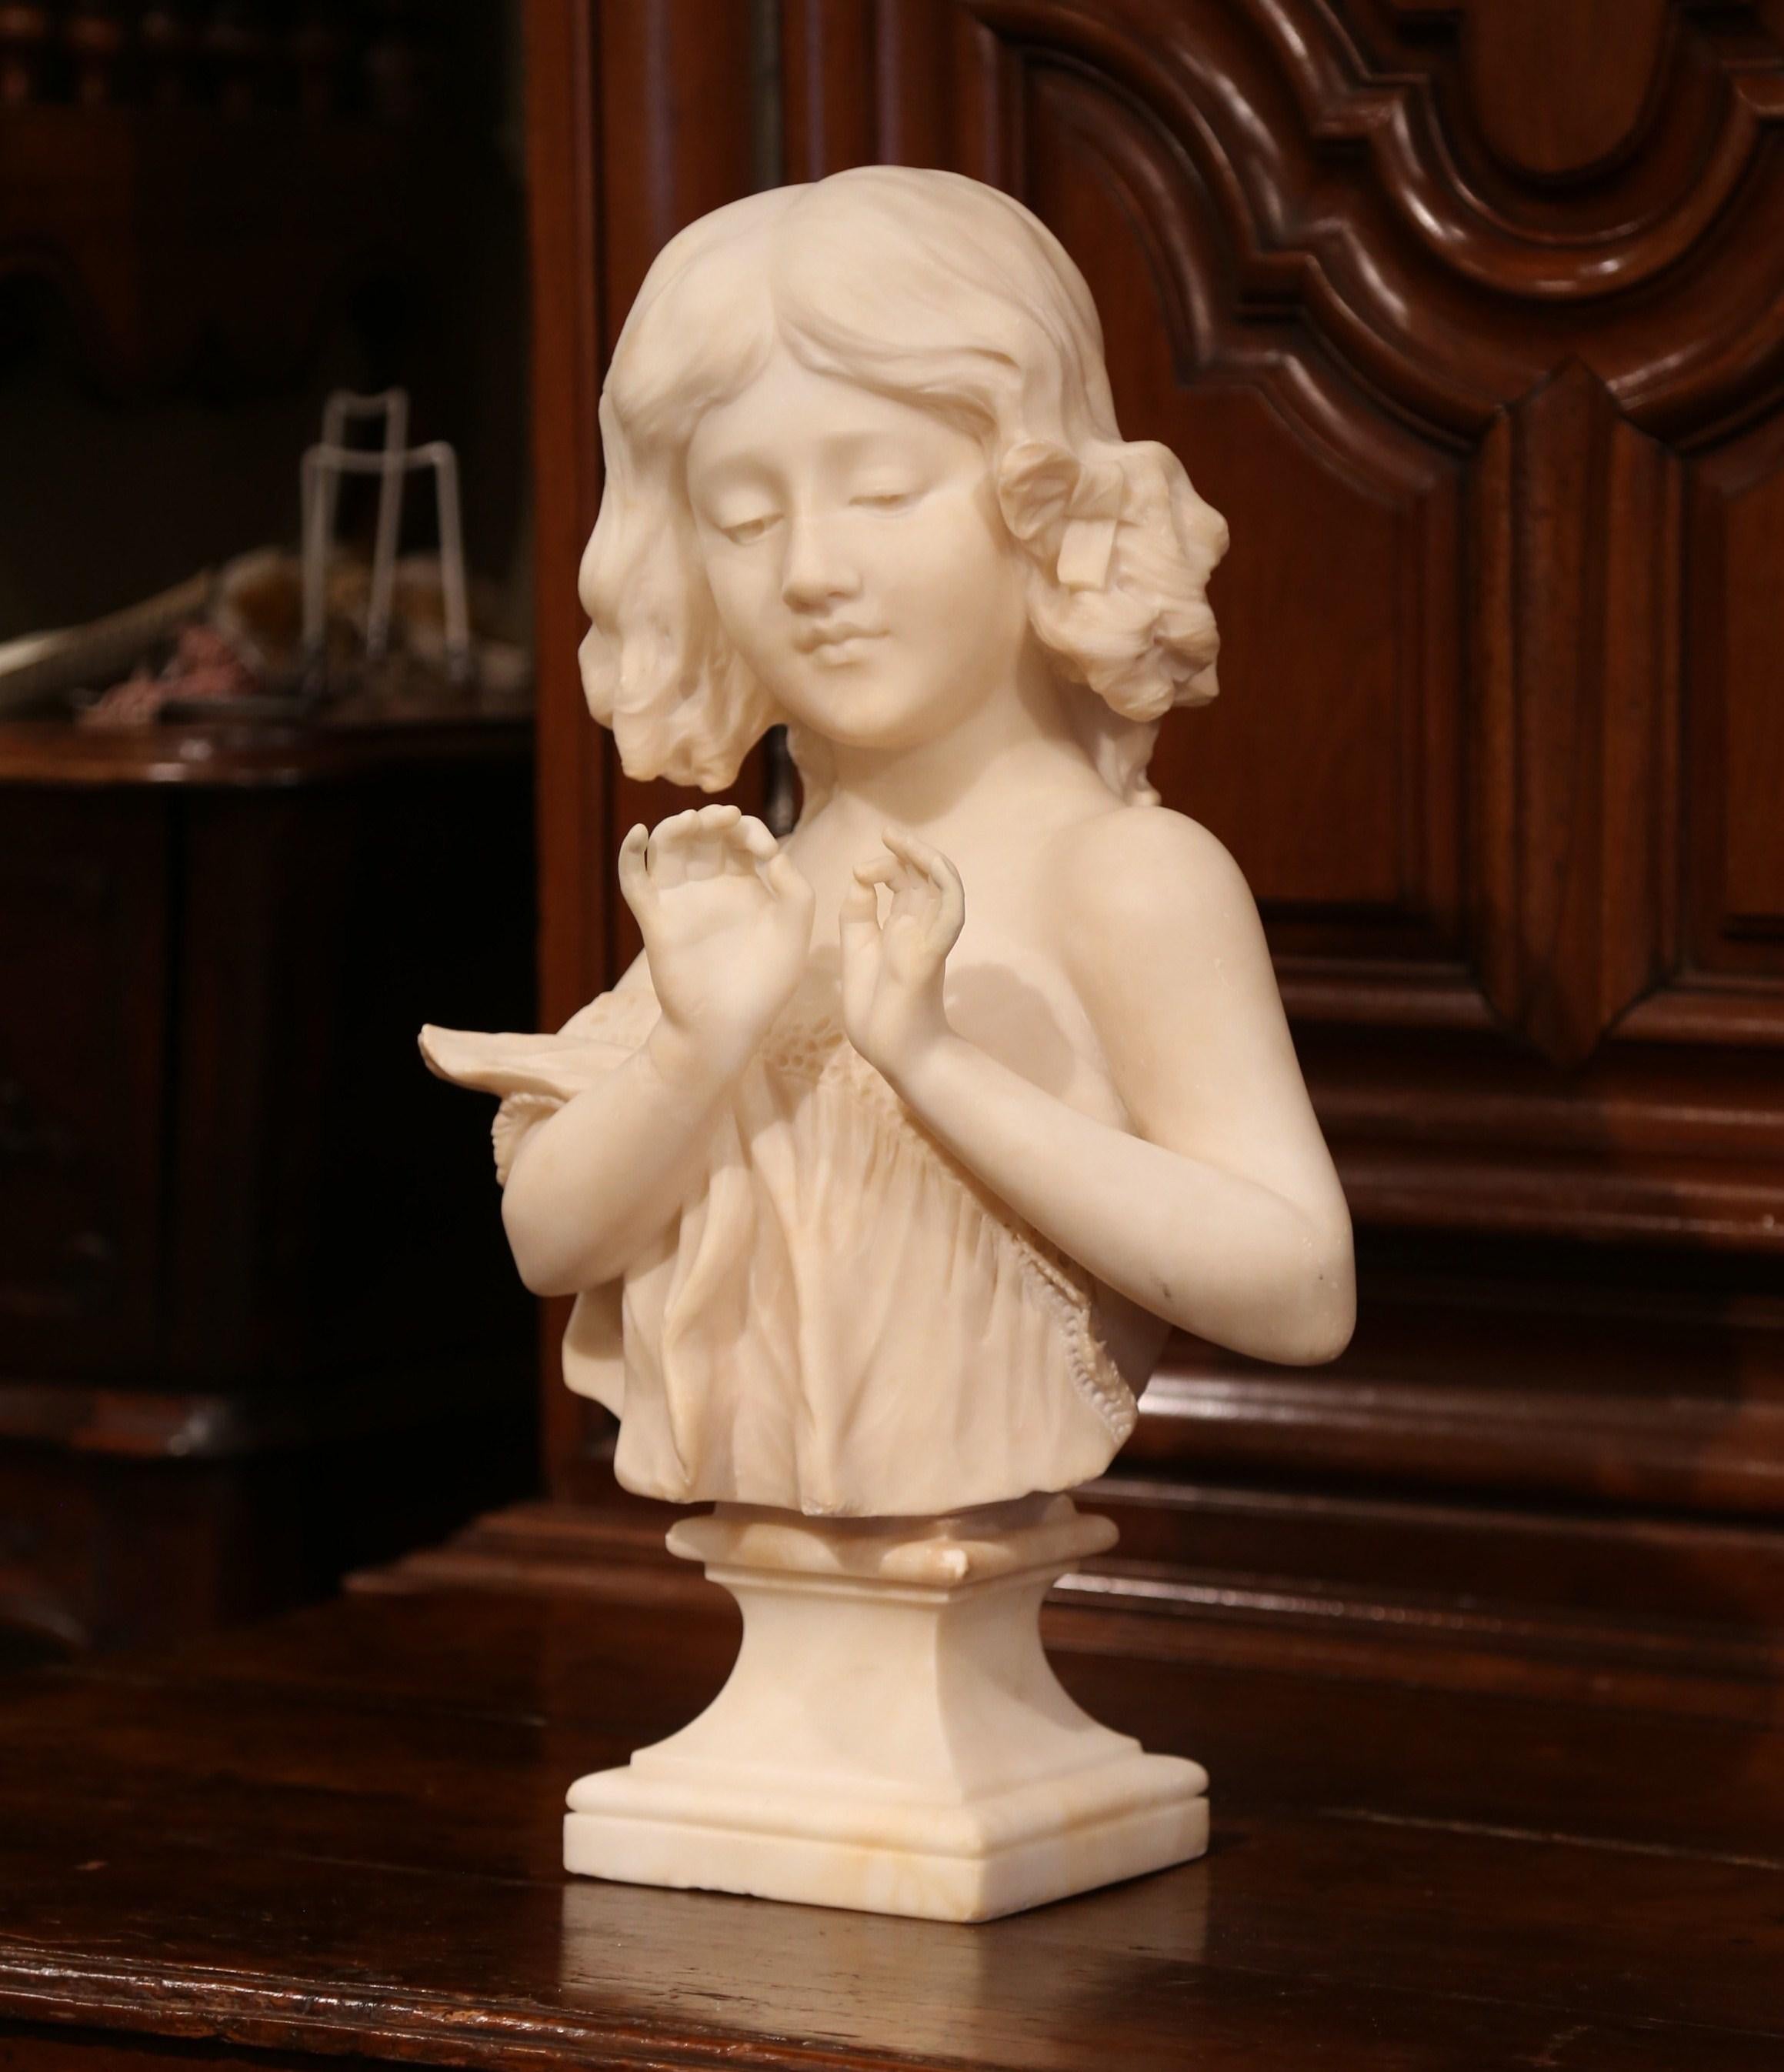 Crafted in France circa 1890, this two-piece white marble bust is a true representation of French elegance. The figural sculpture features the visage of a beautiful, young girl in a lace dress with delicately posed hands. There are a number of